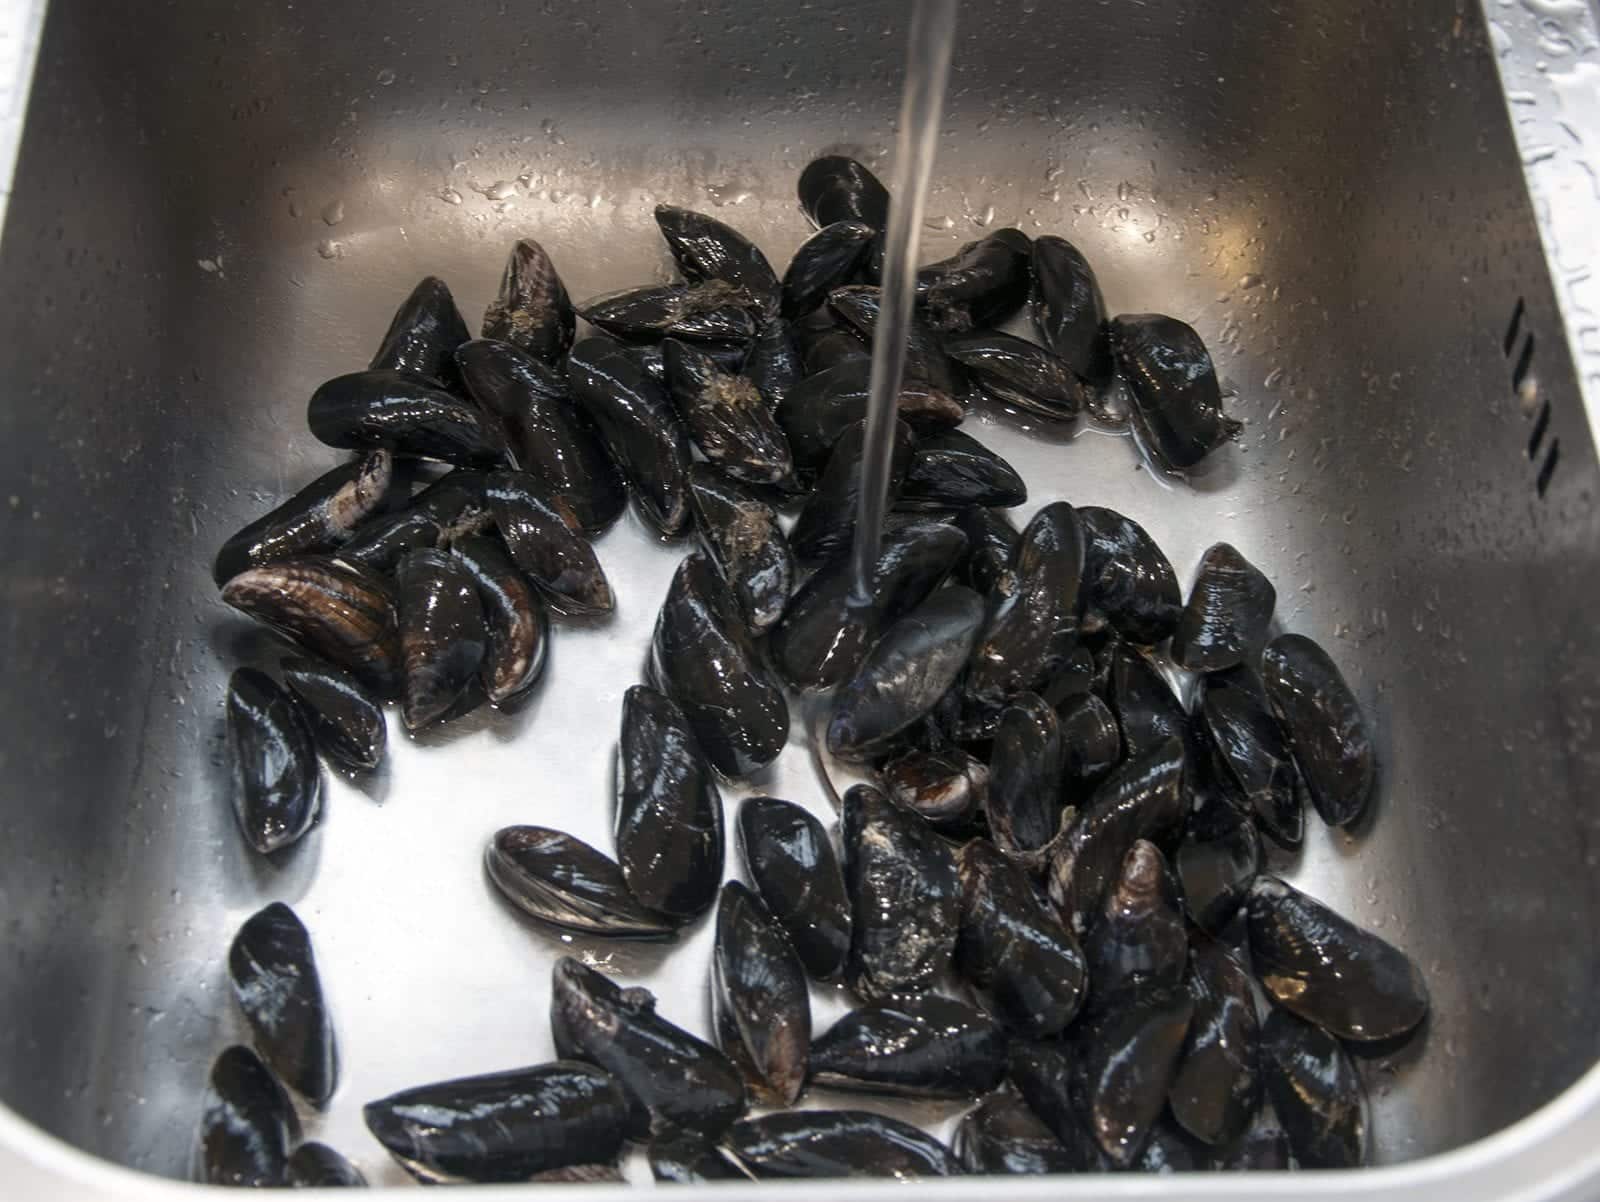 How to prepare a mussel. Make wonderful seafood recipes safely. Clean, debeard and sift out your dead mussels before cooking. | https://theyumyumclub.com